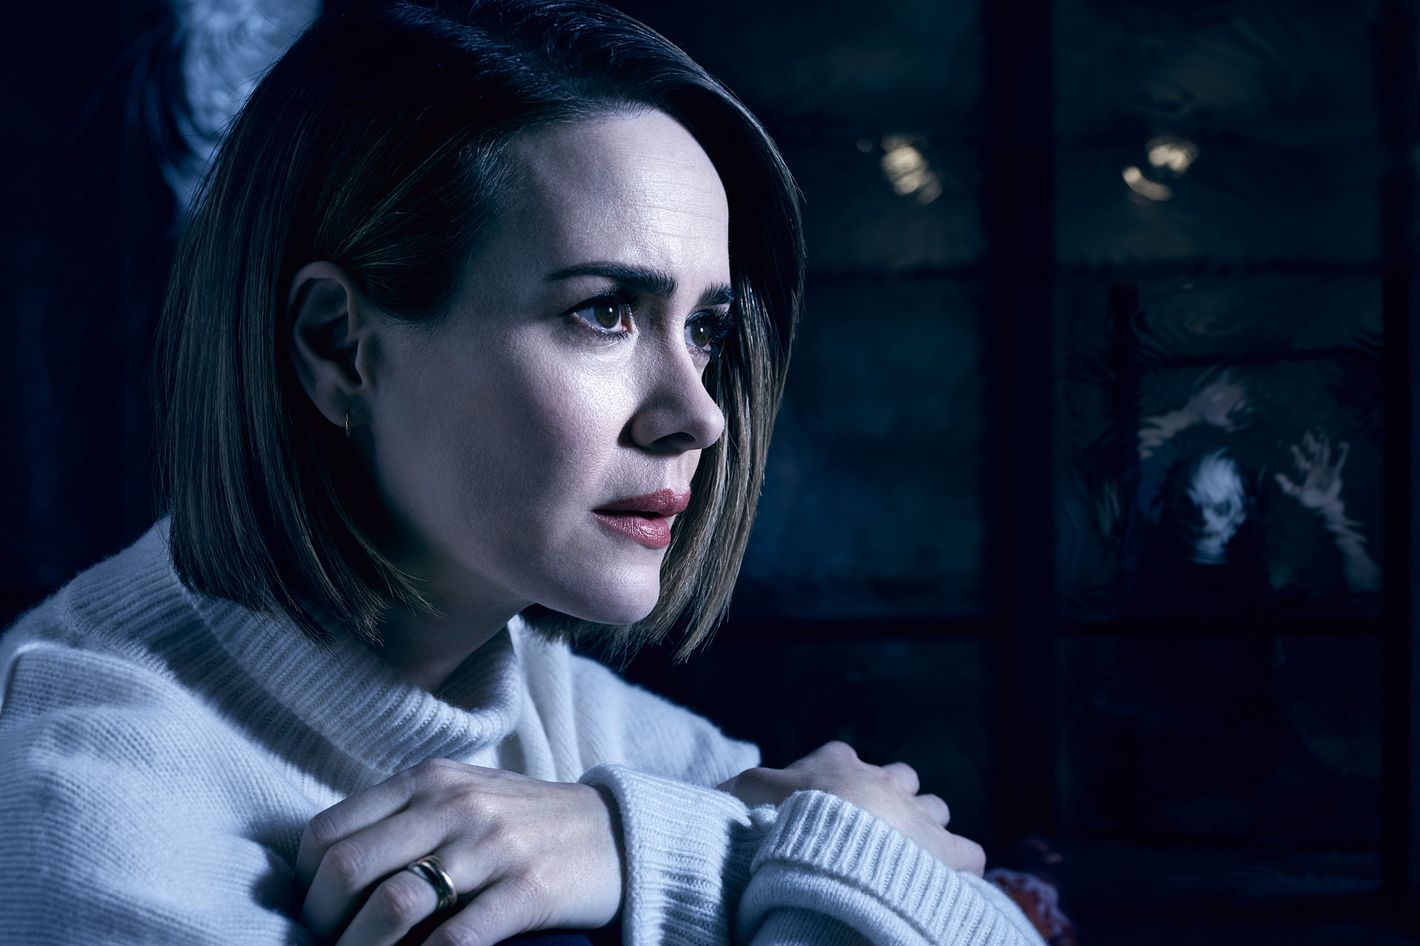 The Way Down': All the Details on Sarah Paulson's Weight Loss Cult